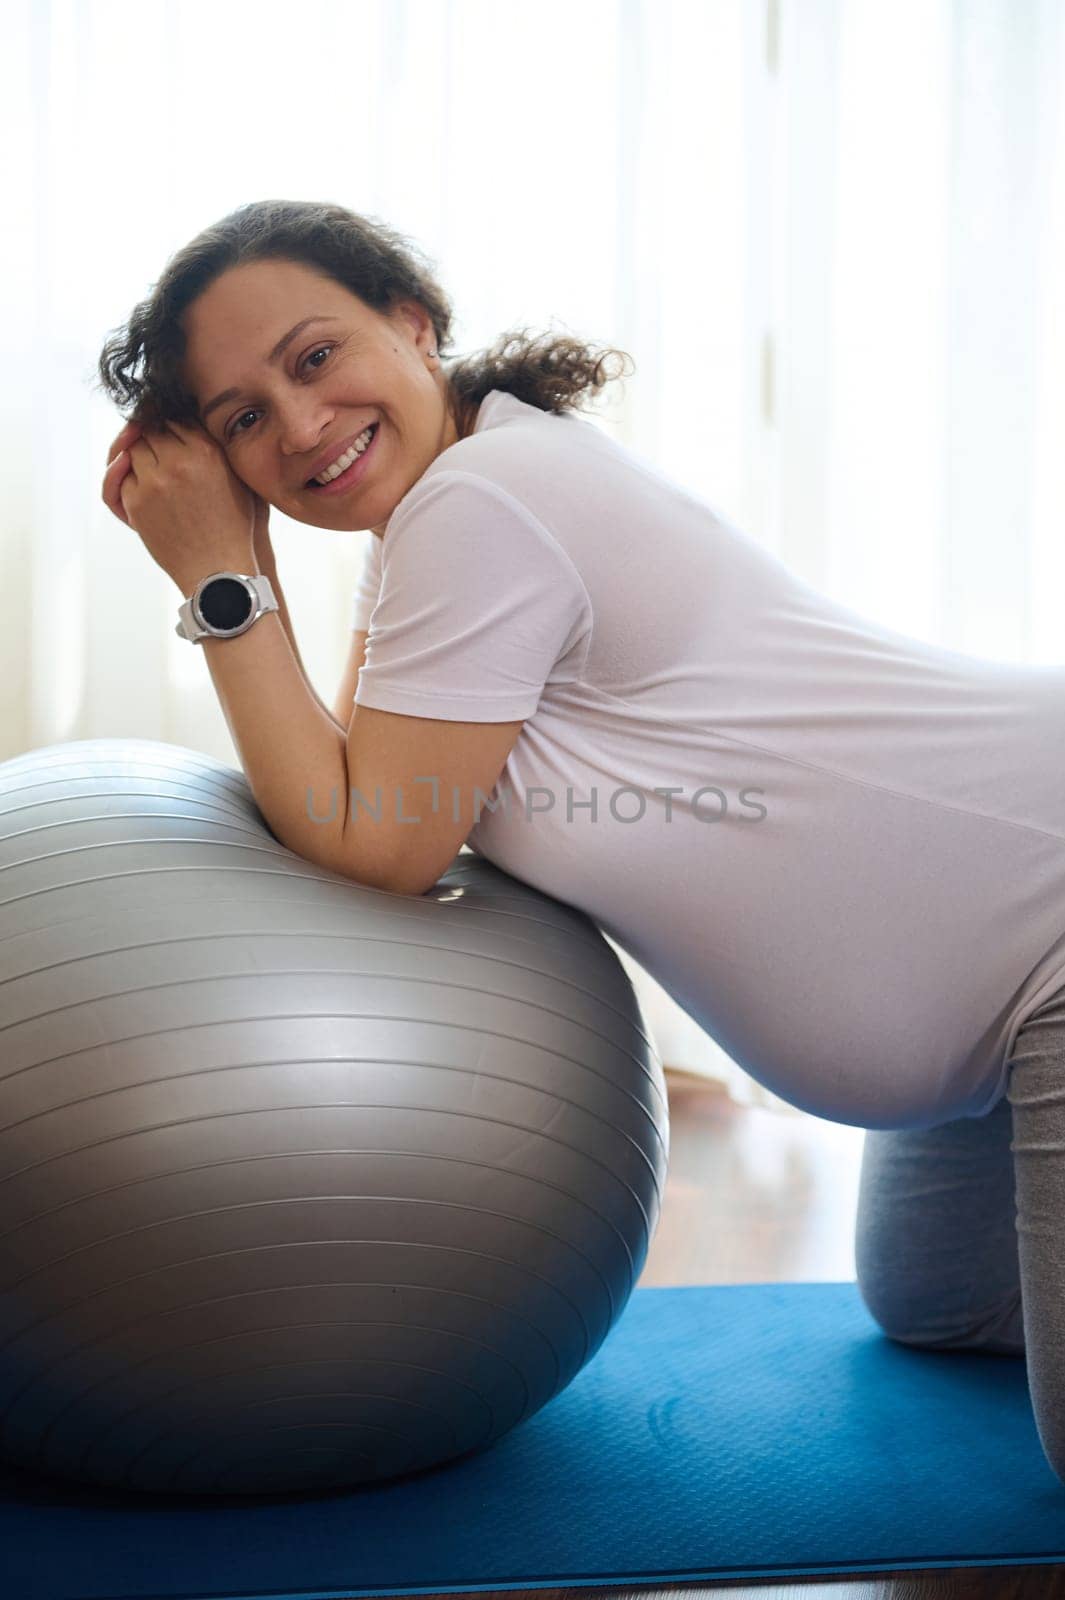 Confident authentic portrait of happy pregnant woman, wearing smart watch to control the heart rate and pulse during fitness workout, exercising with a fit ball at home. Pregnancy. Maternity lifestyle